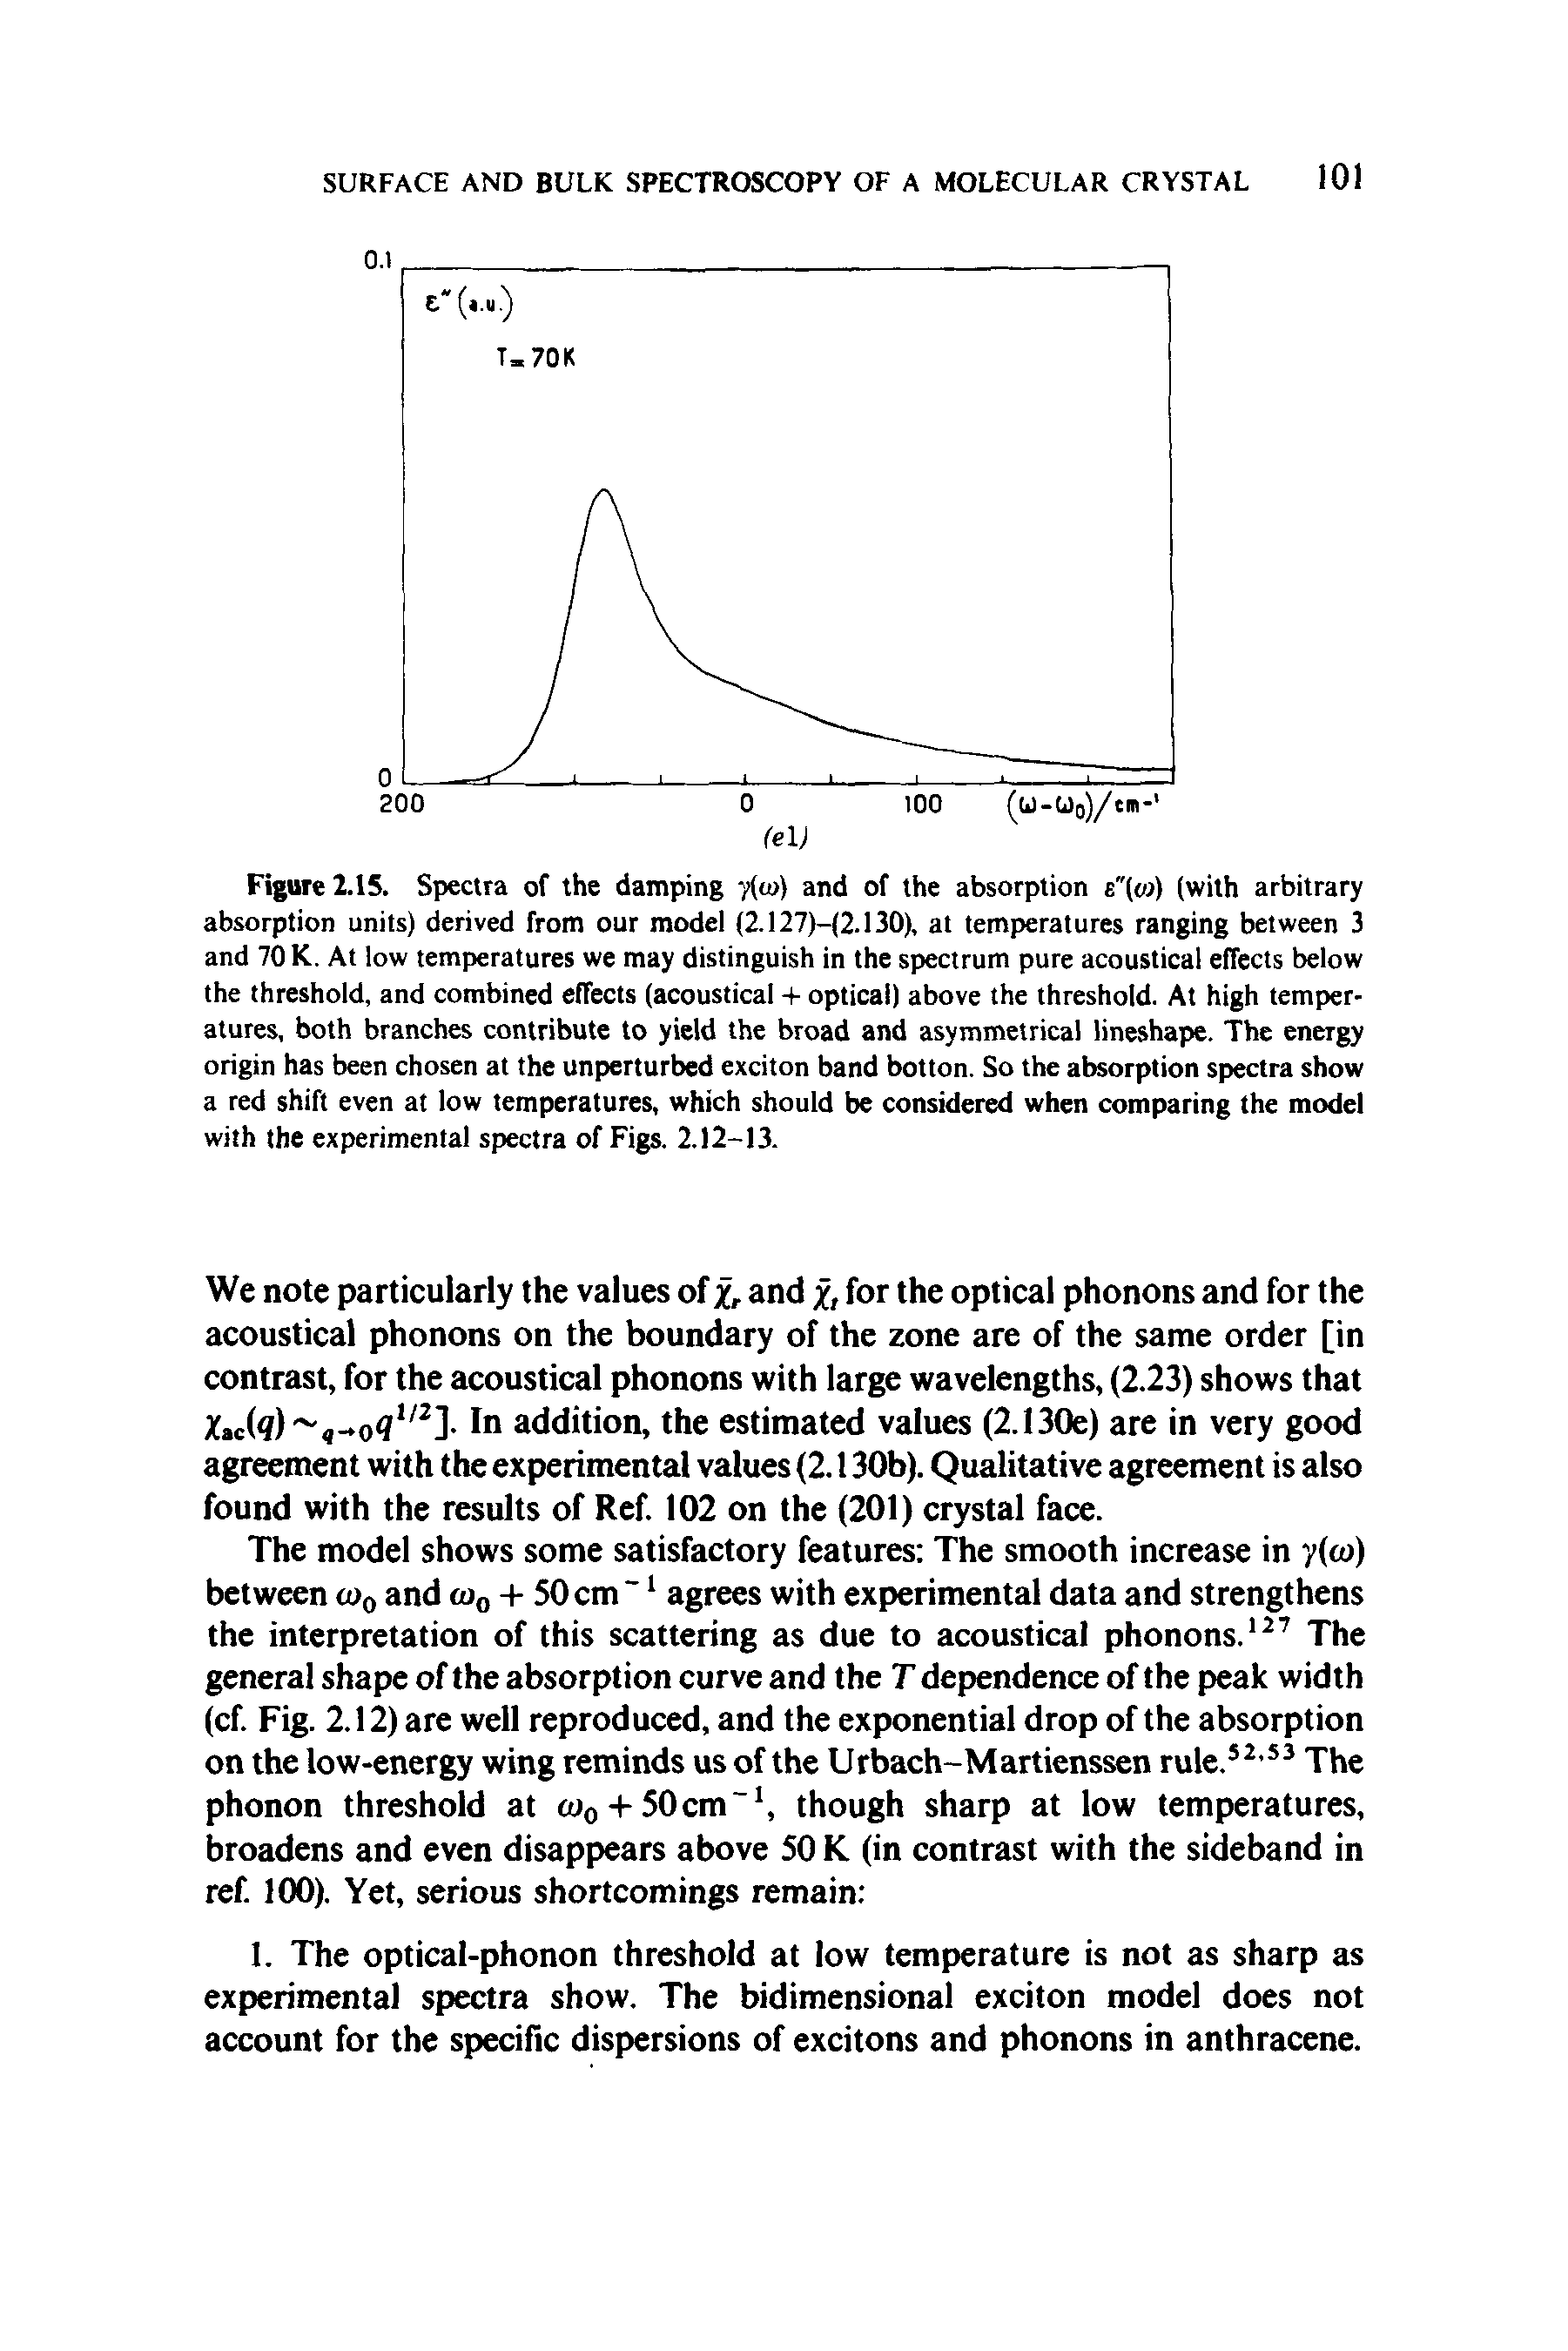 Figure 2.15. Spectra of the damping y(u>) and of the absorption c"(w) (with arbitrary absorption units) derived from our model (2.127)—(2.130), at temperatures ranging between 3 and 70 K. At low temperatures we may distinguish in the spectrum pure acoustical effects below the threshold, and combined effects (acoustical + optical) above the threshold. At high temperatures, both branches contribute to yield the broad and asymmetrical lineshape. The energy origin has been chosen at the unperturbed exciton band botton. So the absorption spectra show a red shift even at low temperatures, which should be considered when comparing the model with the experimental spectra of Figs. 2.12-13.